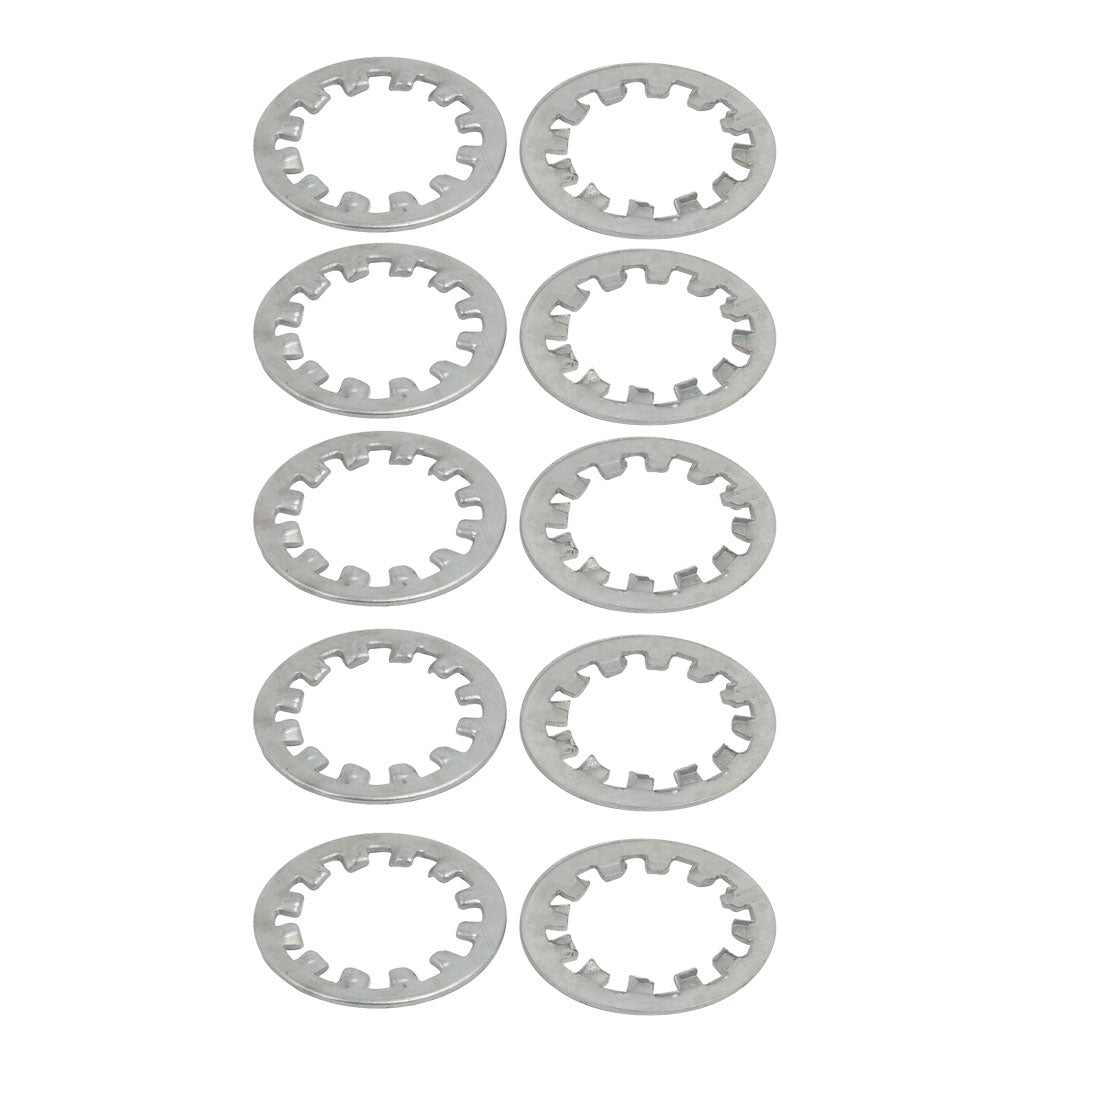 uxcell Uxcell 20mm Inner Dia Carbon Steel Zinc Plated Internal Tooth Lock Washer Silver Tone 10pcs